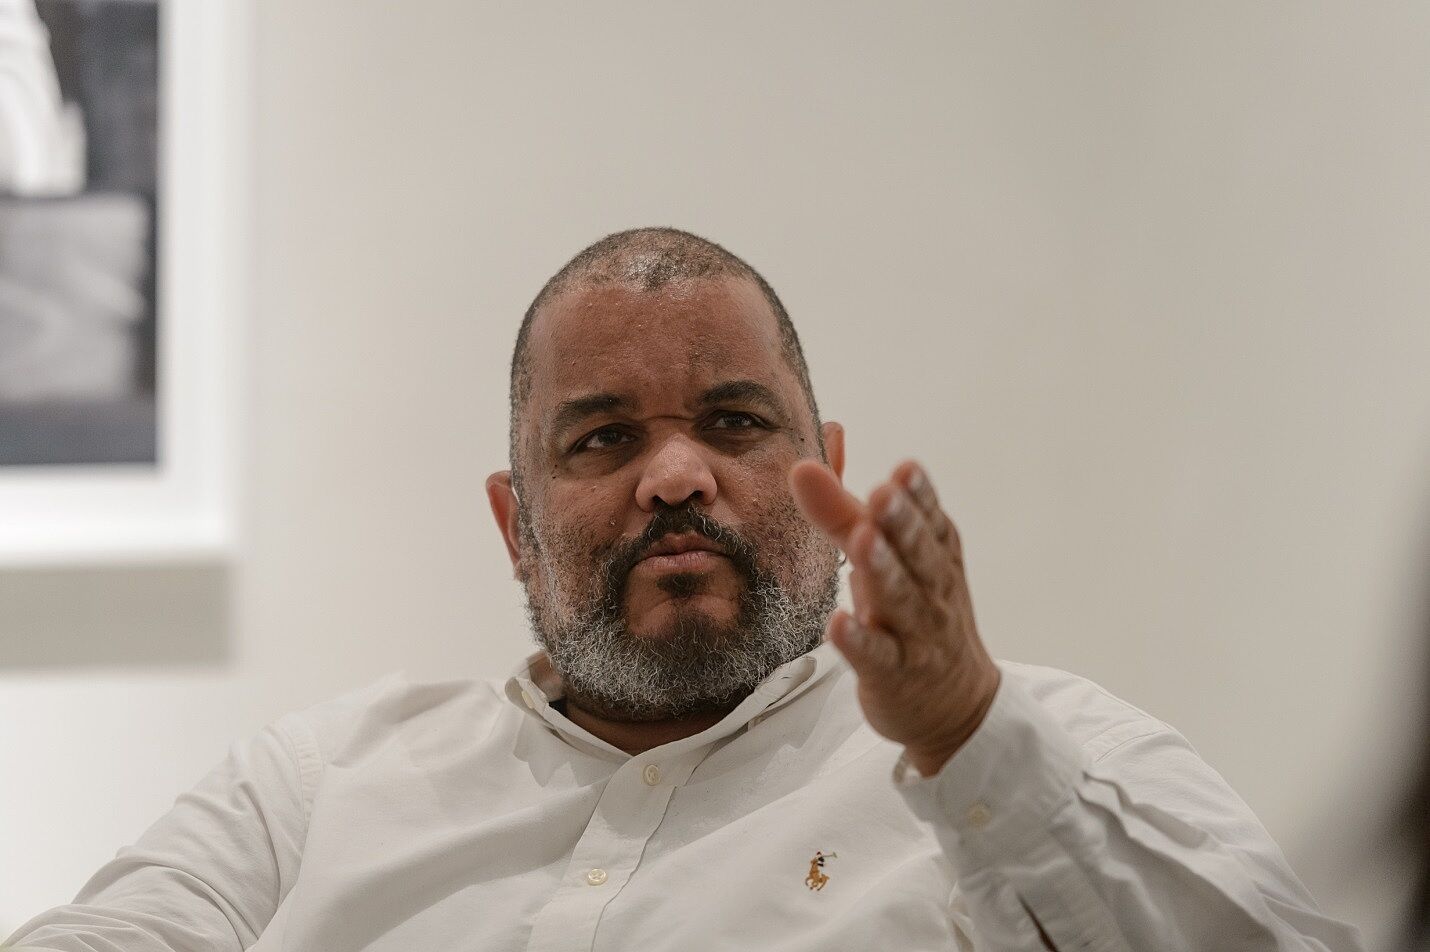 Dawoud Bey raises his hand to make a point.